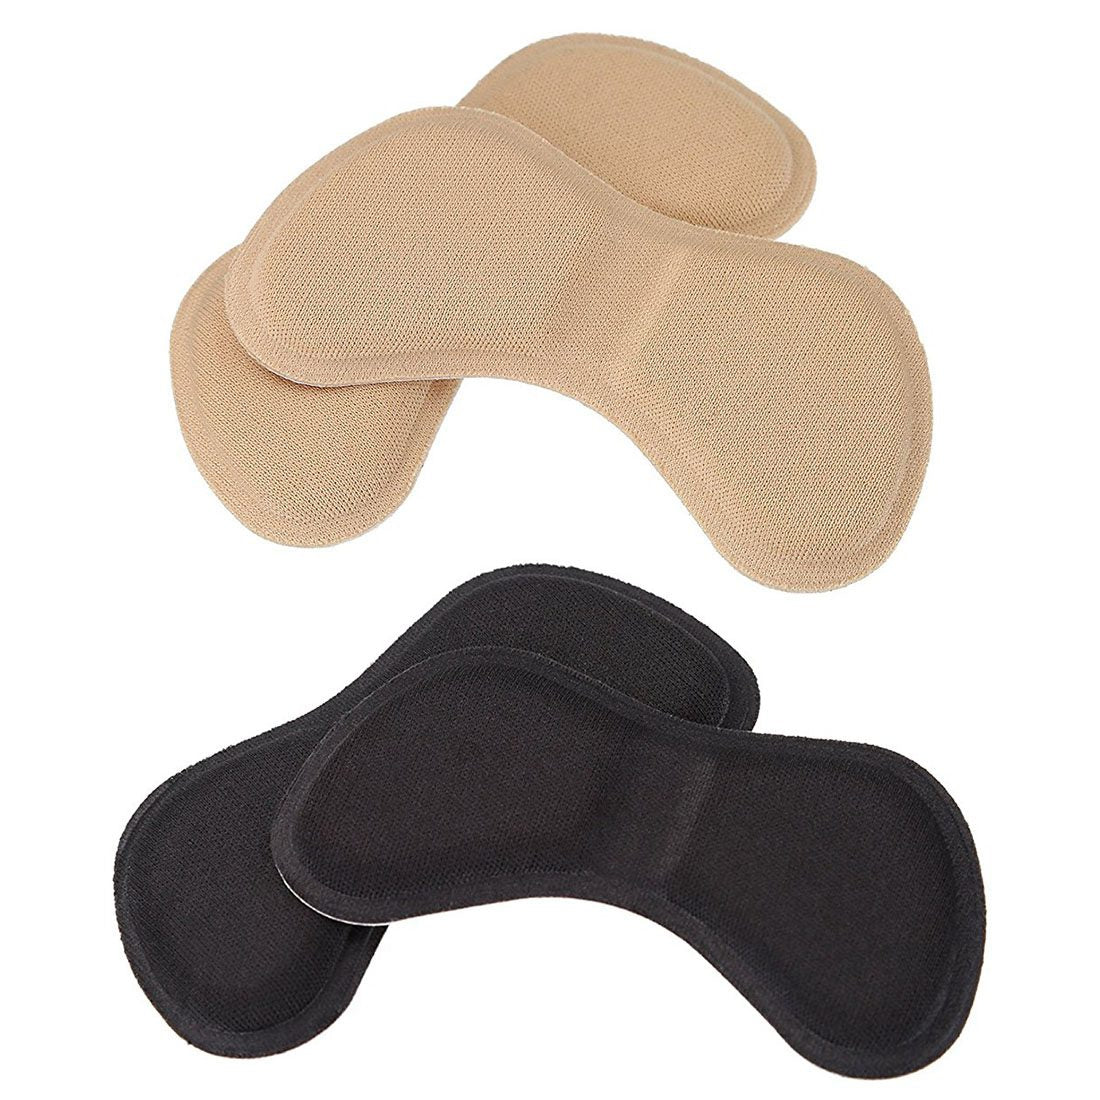 Hot-6 Pairs Heel Stickers Heel Cushion Pads Shoe Heel Insoles for Improved Shoe Fit and Comfort, Black+Beige - ebowsos